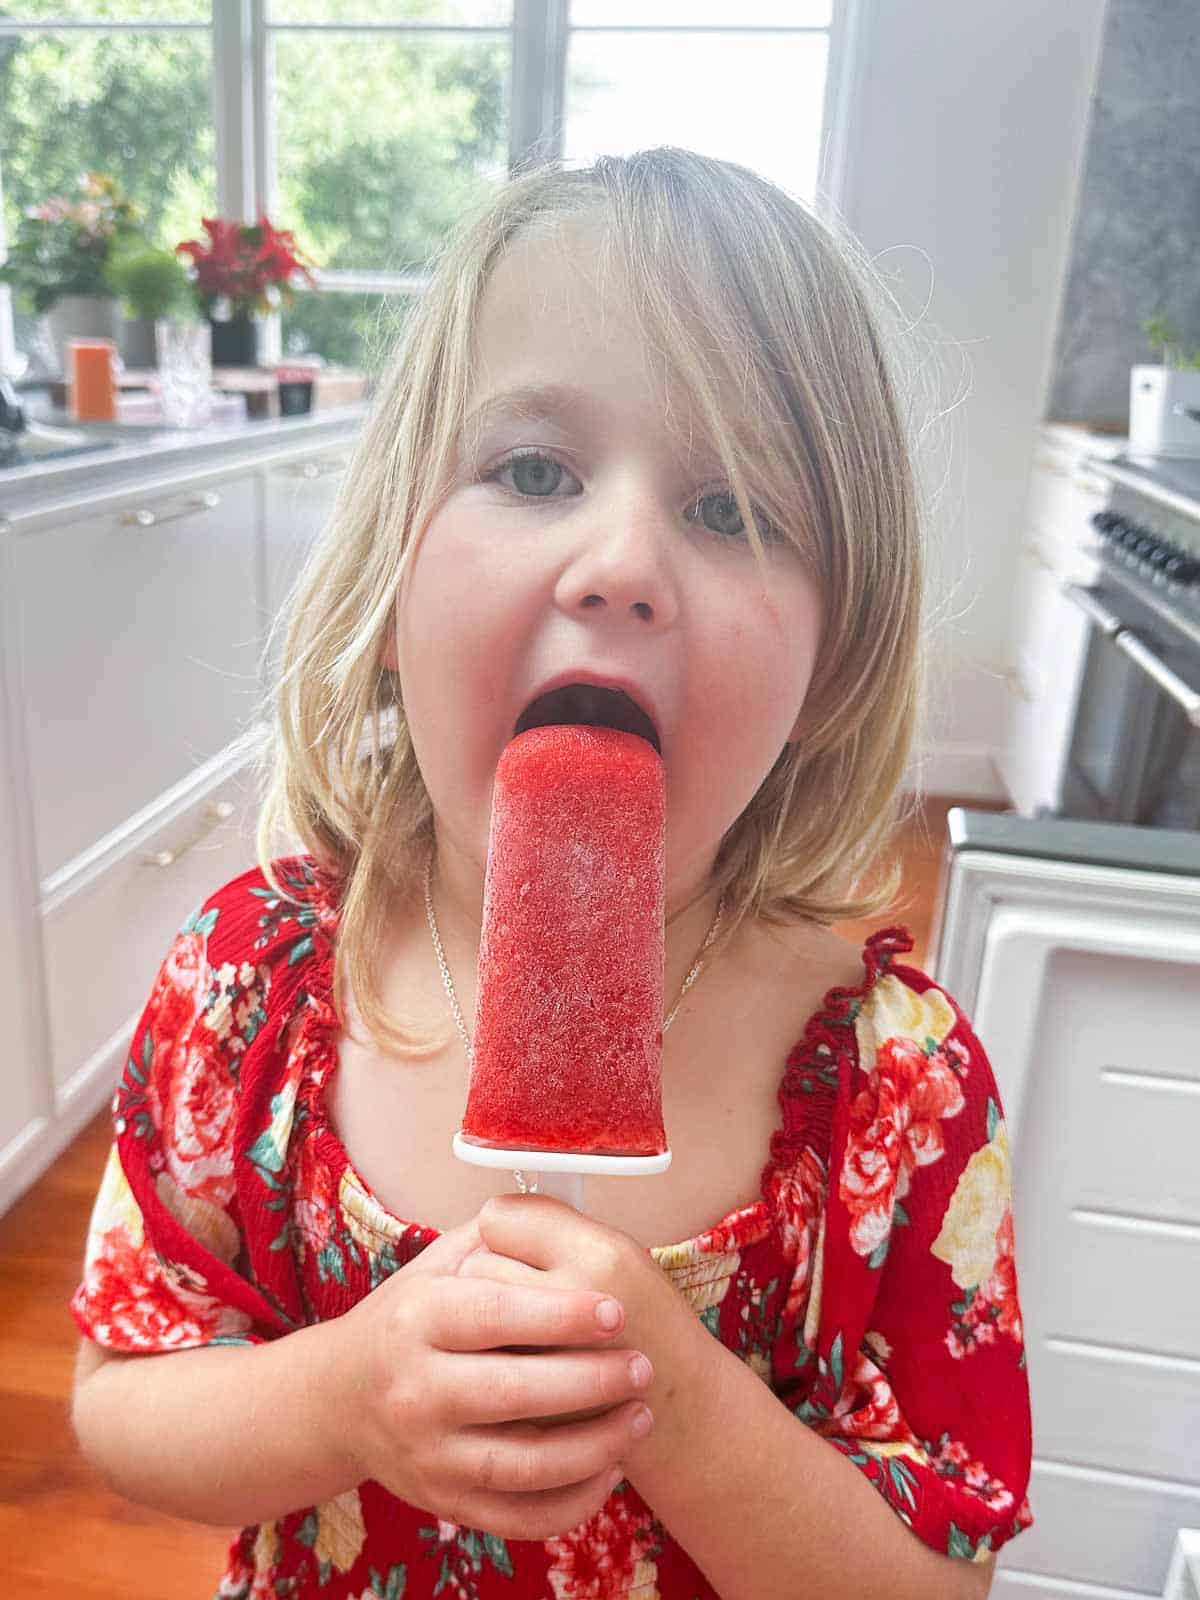 A young girl in a red floral dress liking a strawberry popsicle. 